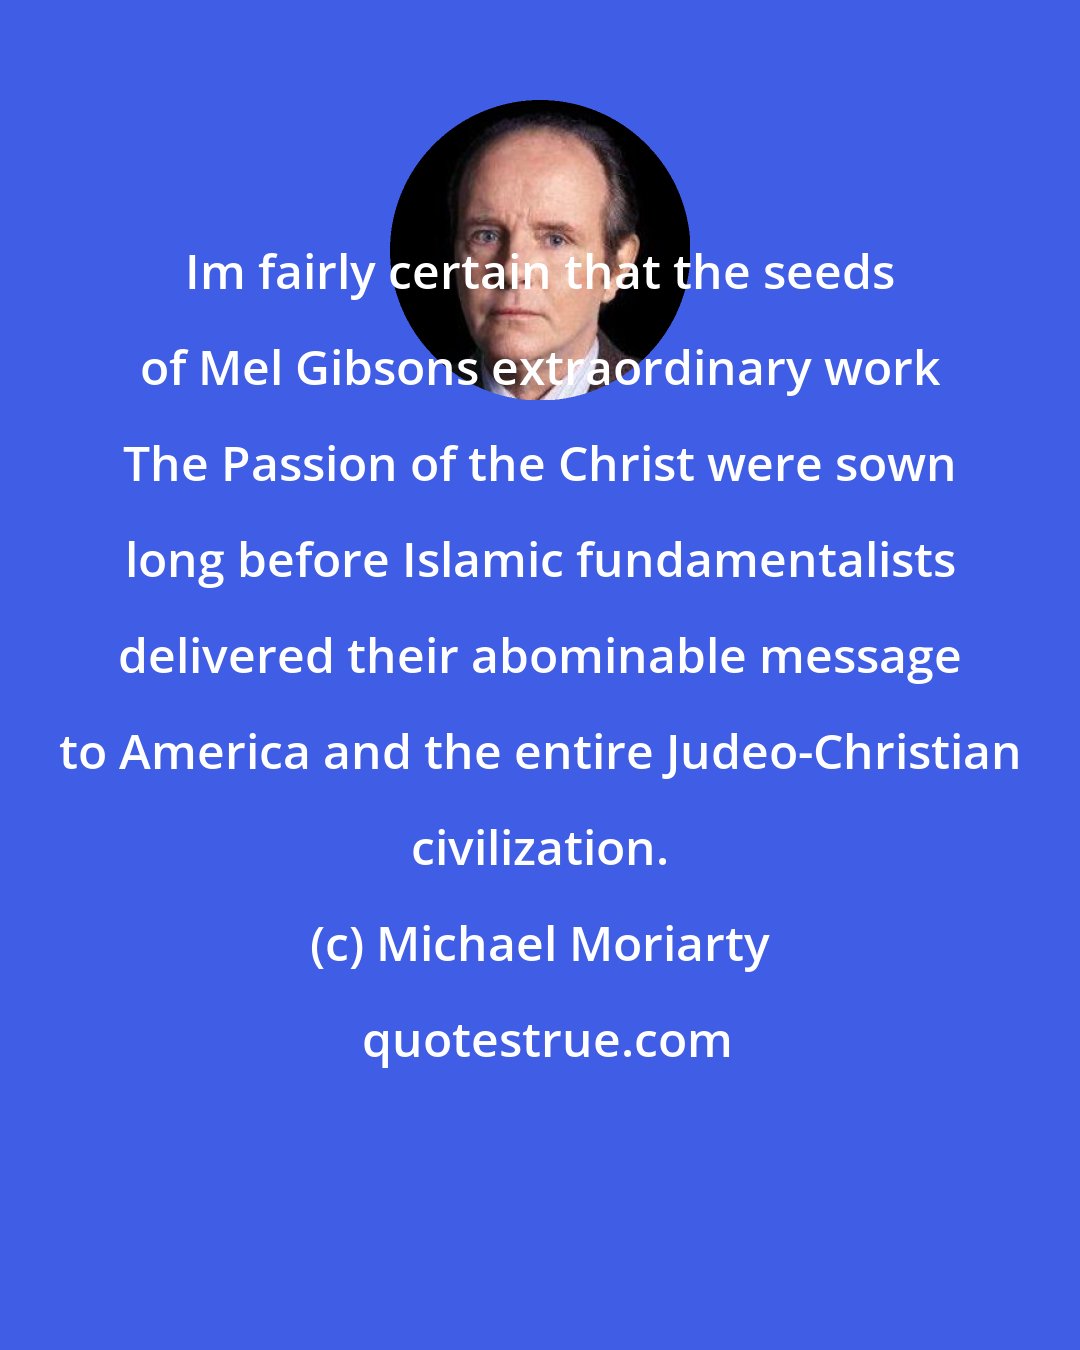 Michael Moriarty: Im fairly certain that the seeds of Mel Gibsons extraordinary work The Passion of the Christ were sown long before Islamic fundamentalists delivered their abominable message to America and the entire Judeo-Christian civilization.